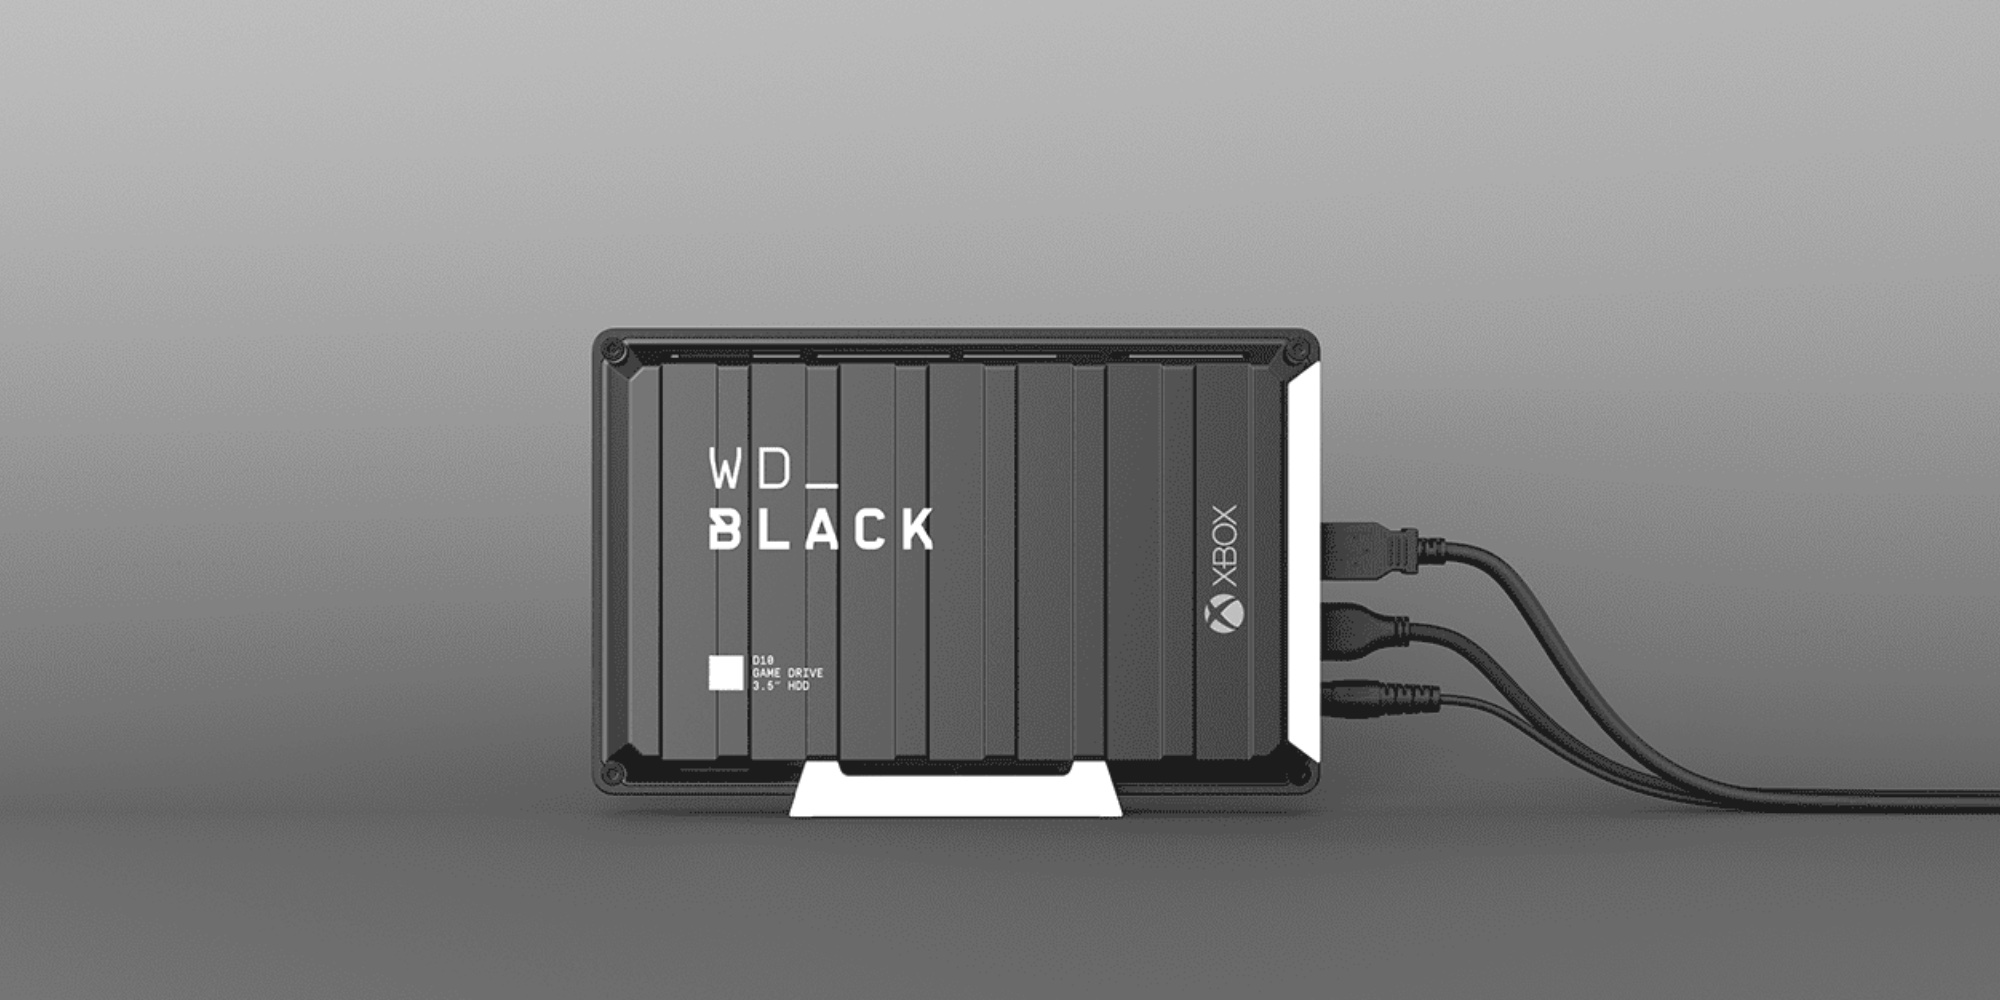 Wd Black Game Drives Launch With 5 New Options For Consoles 9to5toys